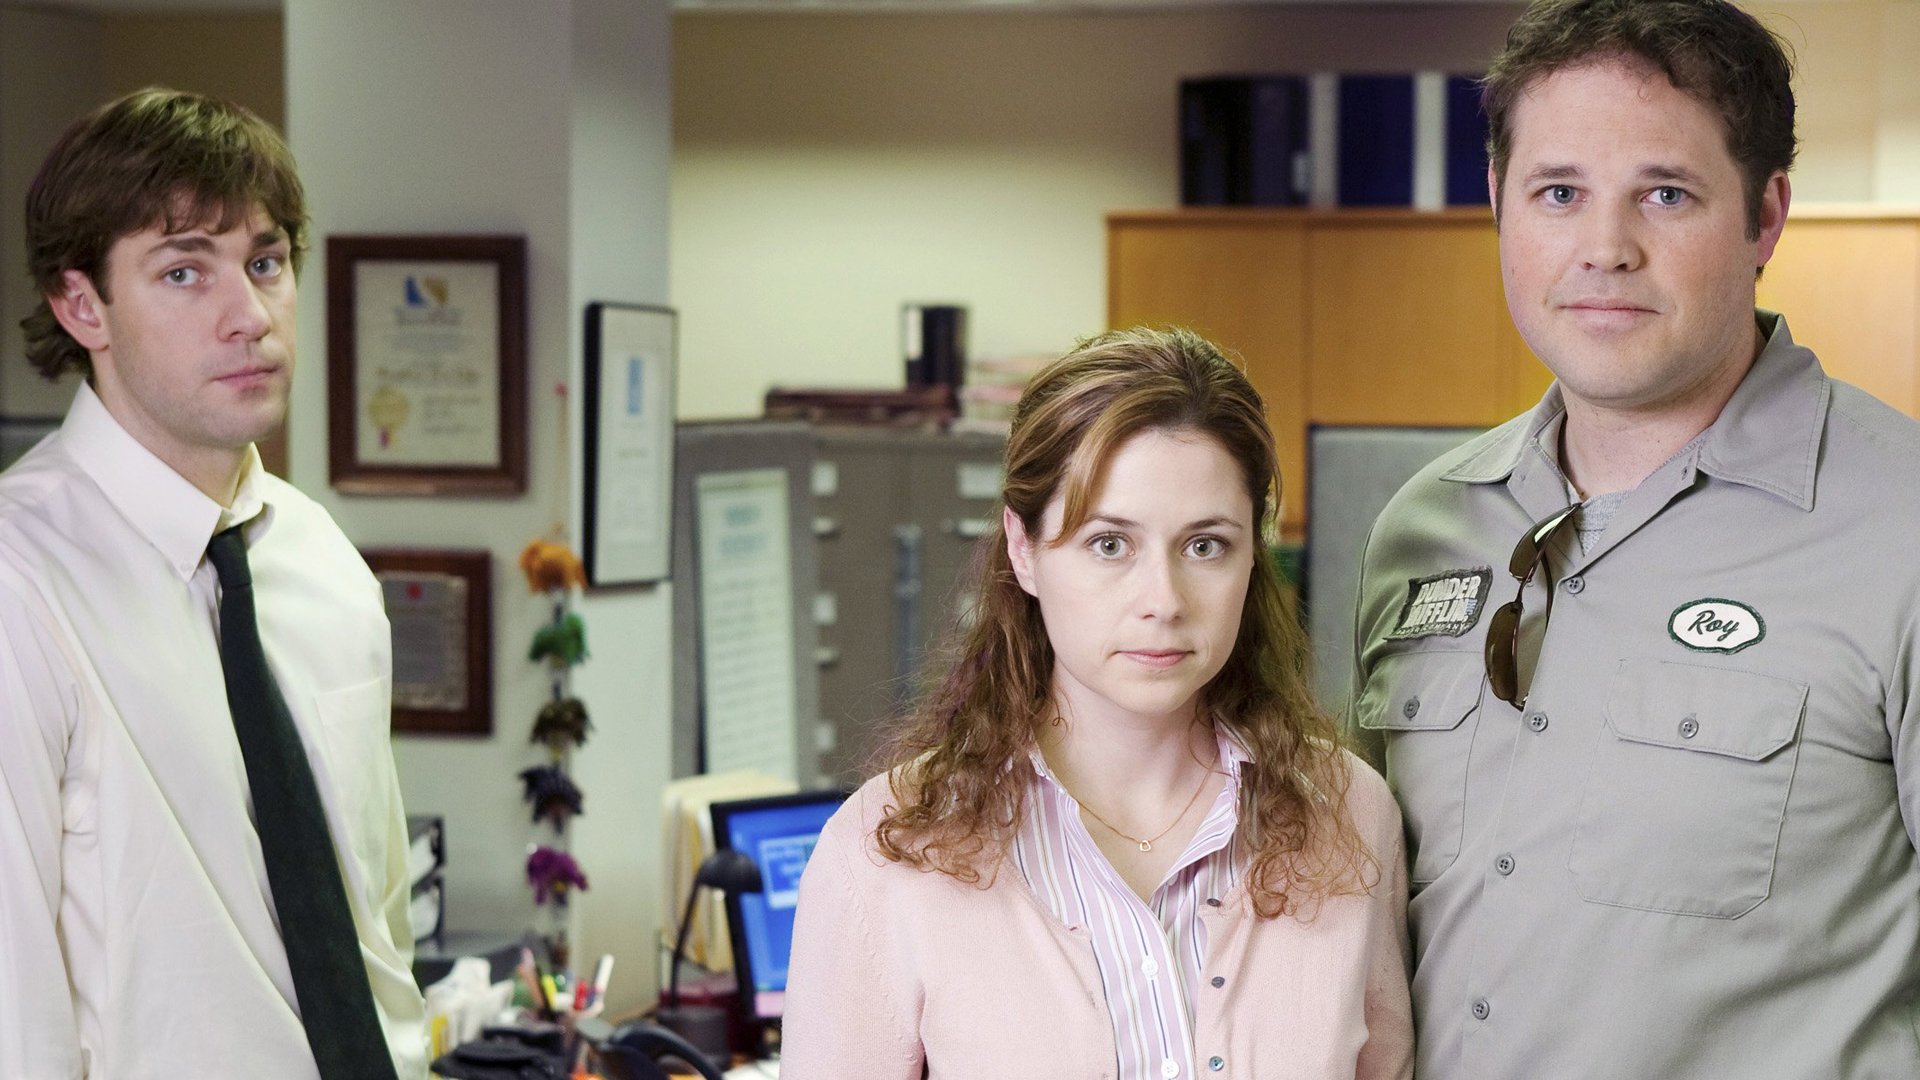 'The Office': Jenna Fischer's Pam and Roy Theory Is Wild, But We Could Totally See It Happening at the Time - Showbiz Cheat Sheet